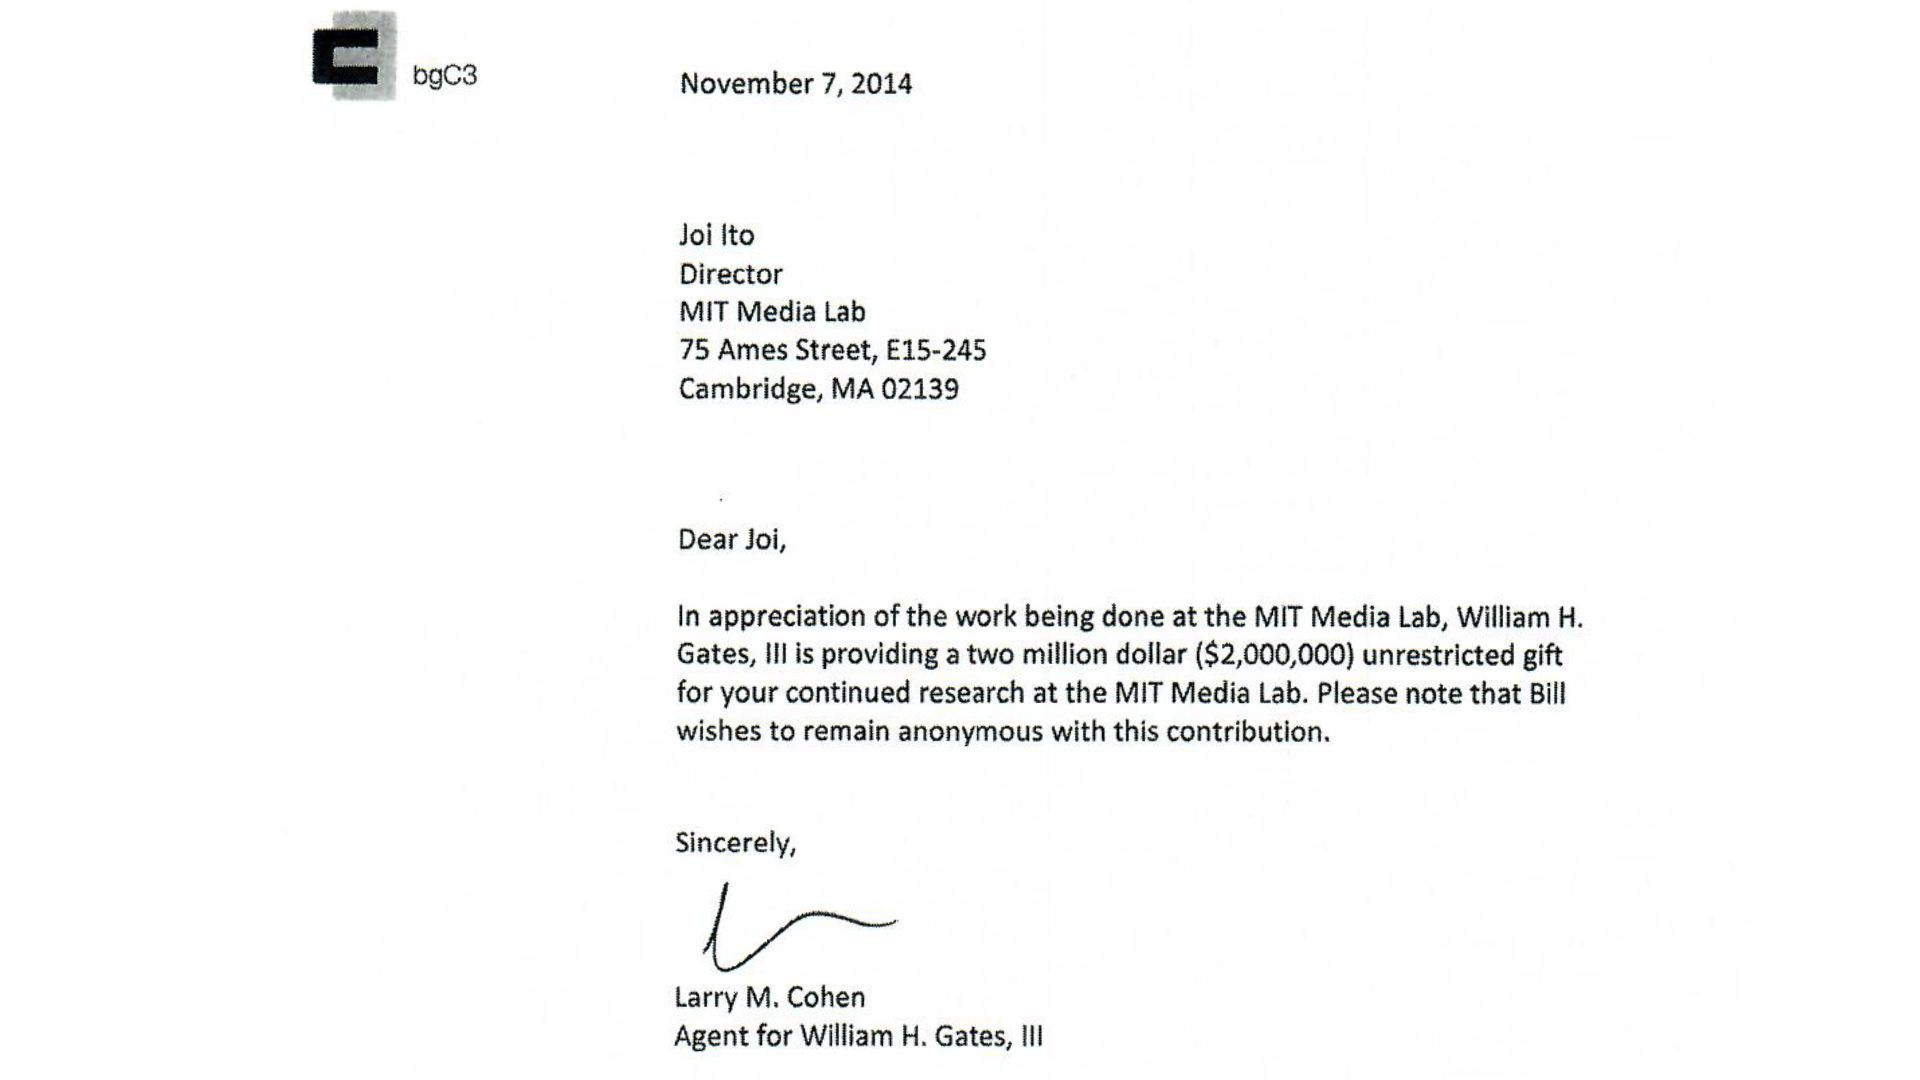 Letter from Bill Gates giving $2m to the Media Lab